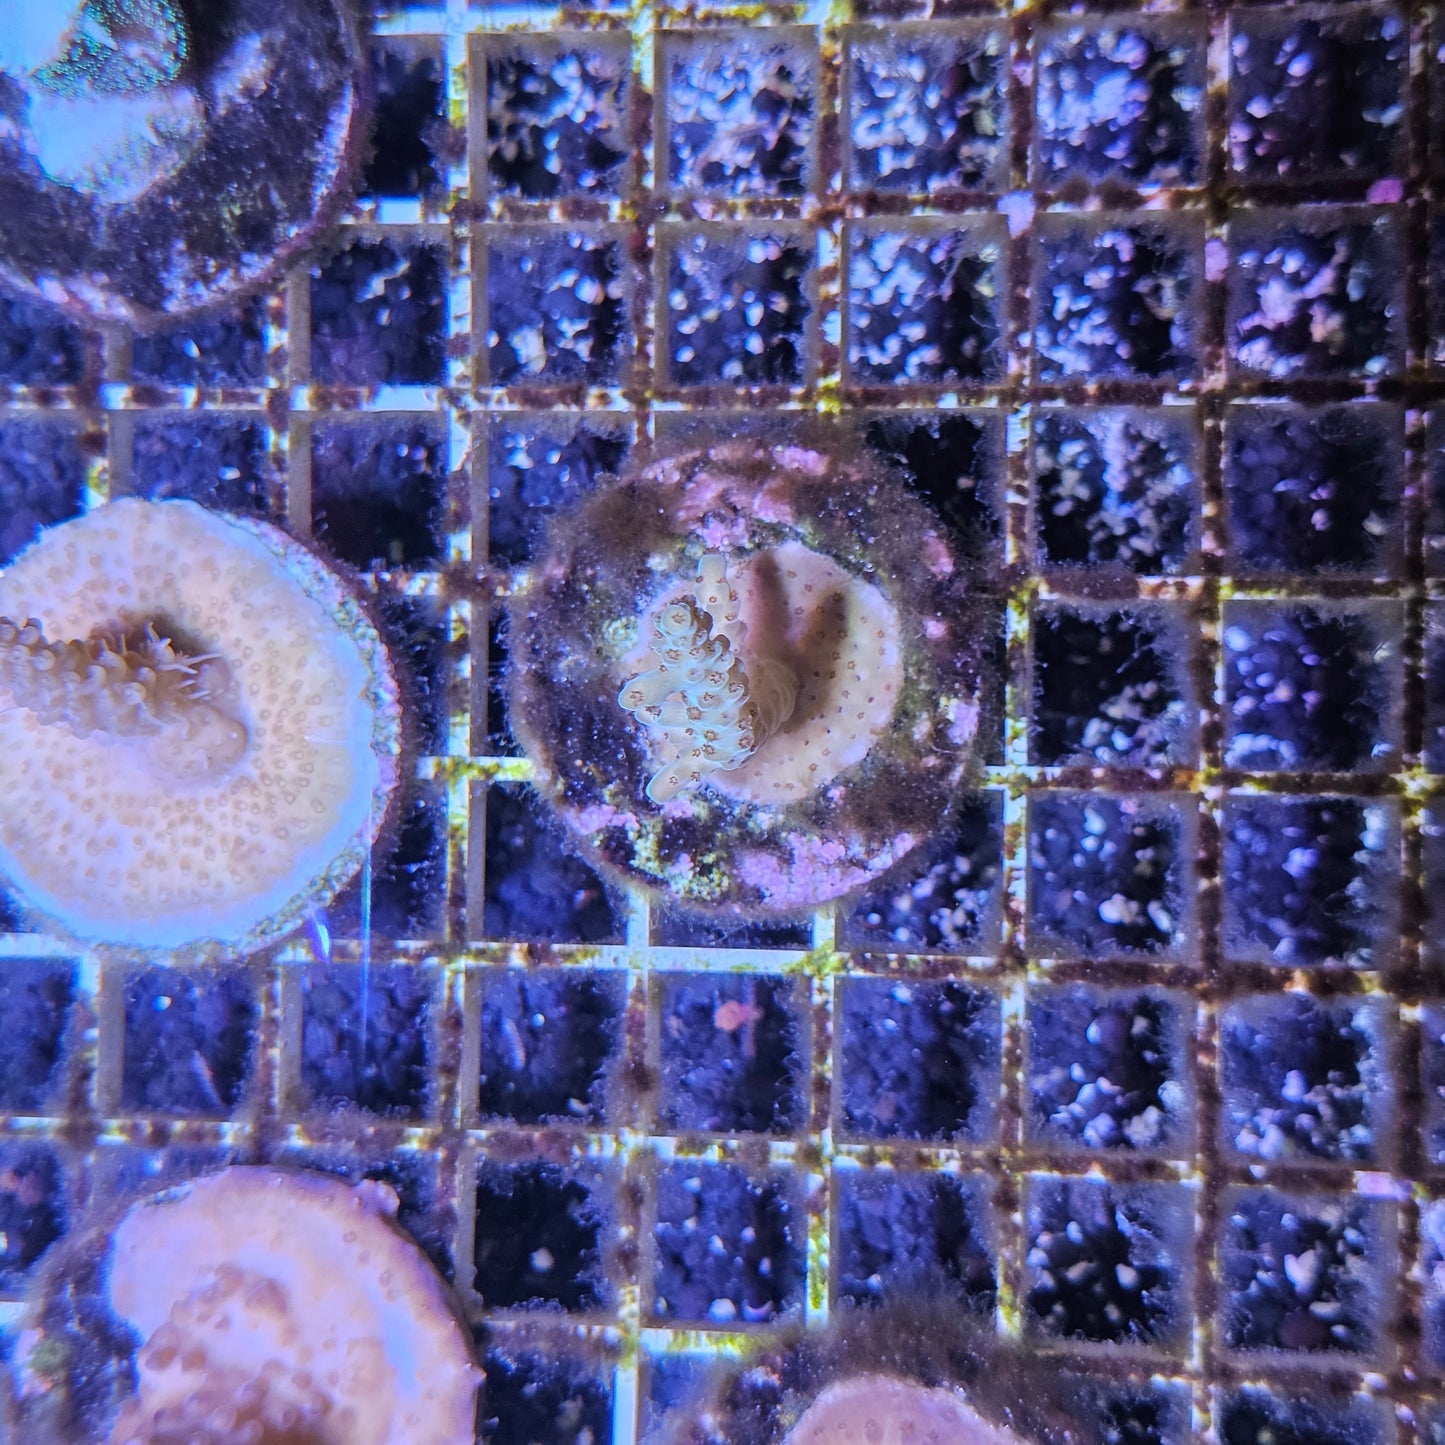 Assorted Indo Acro Coral Frag